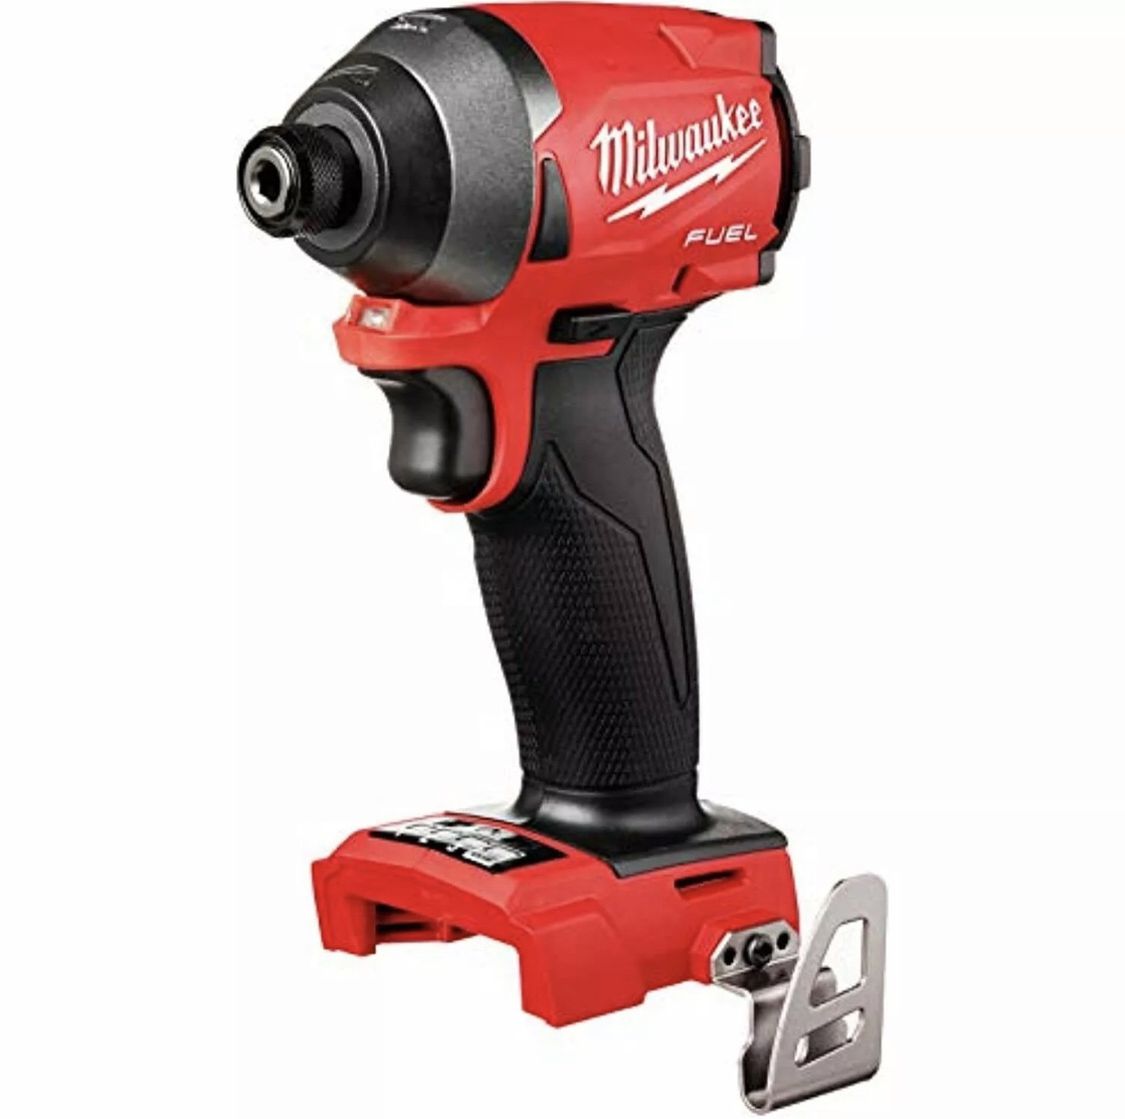 NEW Milwaukee 2853-20 M18 FUEL 1/4" Hex impact Driver Torque 2000 in lbs - New 3rd Generation (TOOL ONLY)